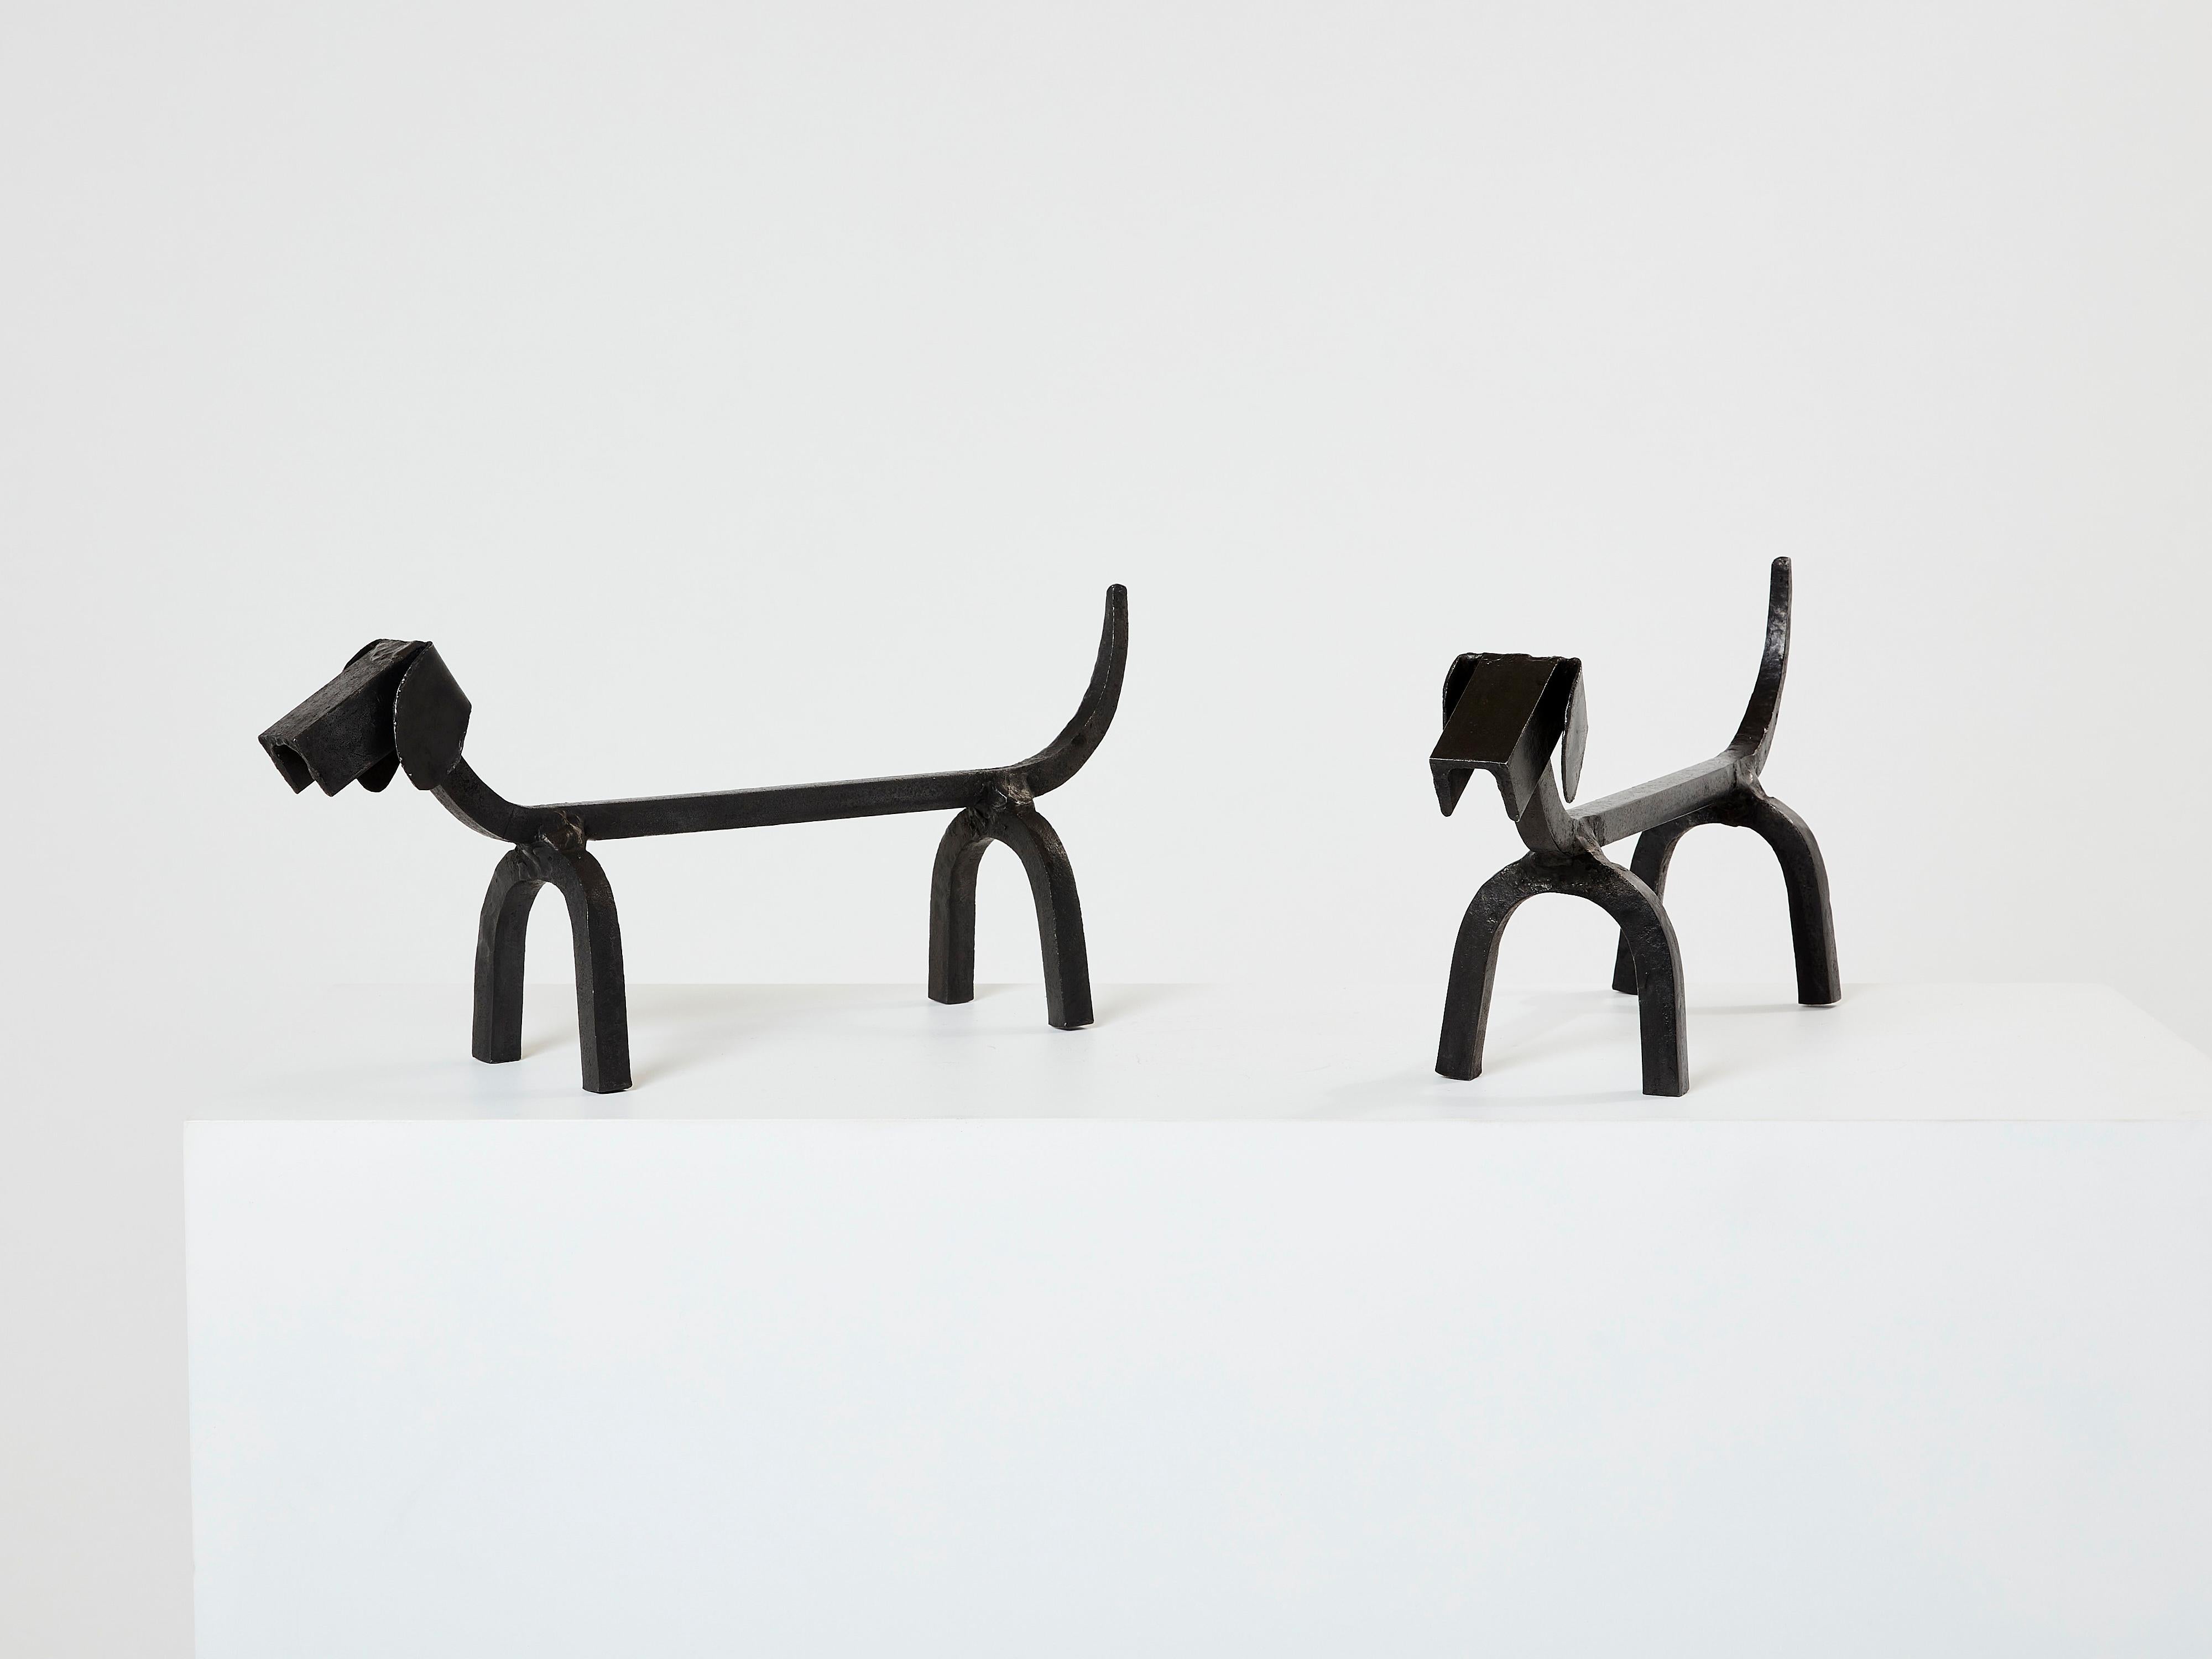 Here is a pair of vintage wrought iron dachshund andirons designed by Edouard Schenck in the early 1950s. Edouard Schenck was a French andiron maker who designed zoomorphic pieces as andirons. The quality of his work is actually unmatched when it